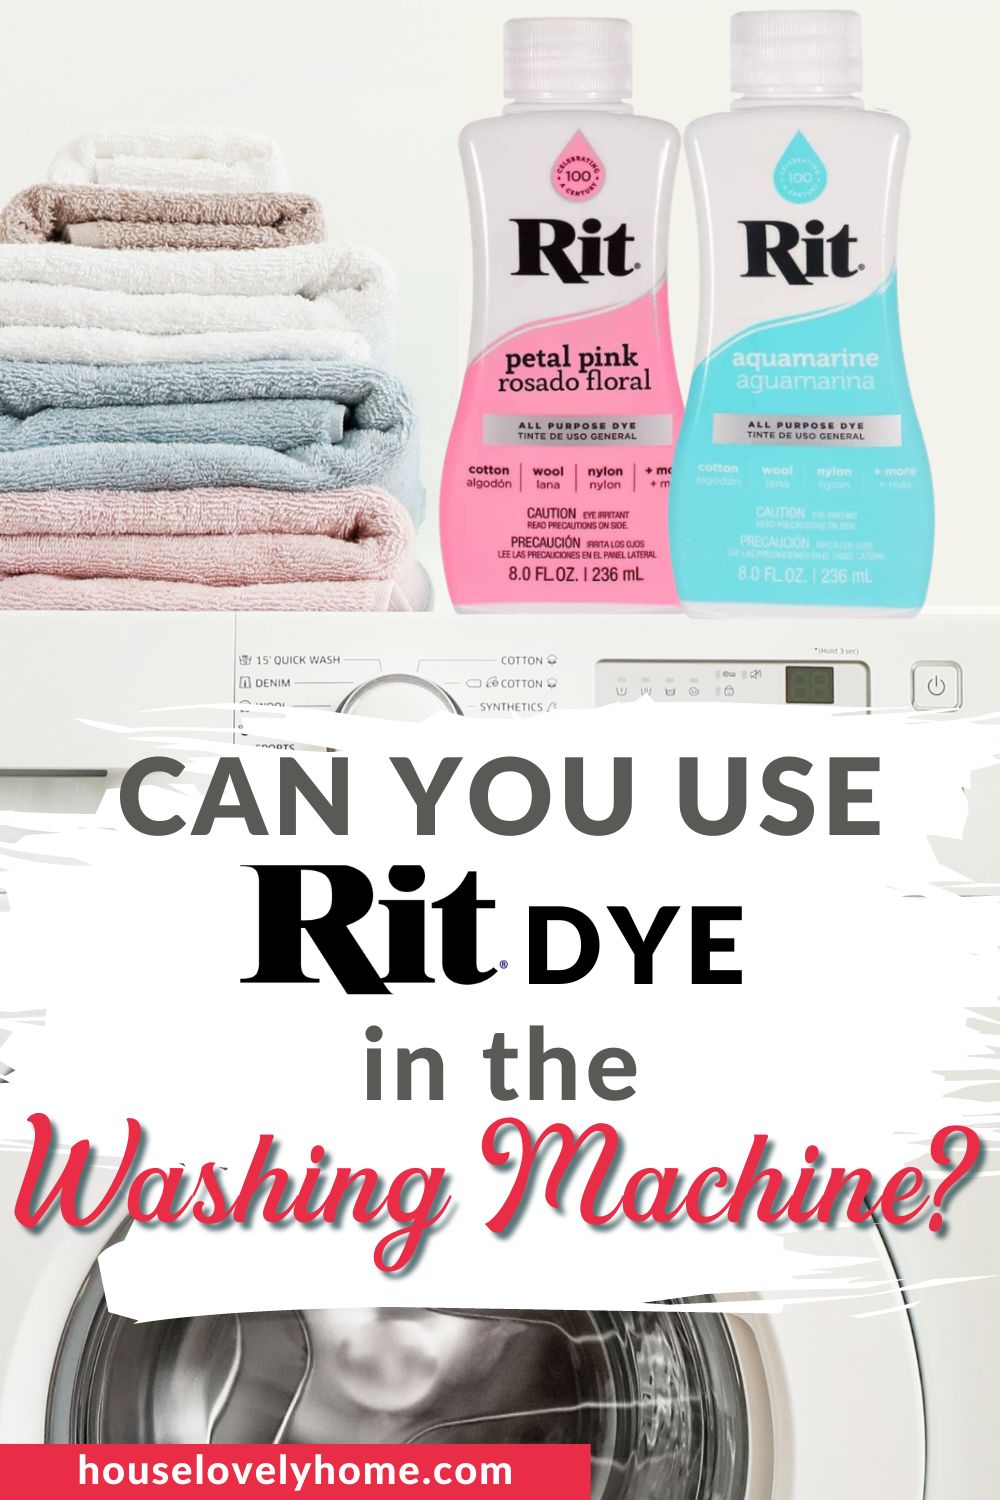 Image showing a washing machine and folded laundry on top with overlay images of 2 rit dyes and text overlay that reads Can You Use Rit Dye in the Washing Machine